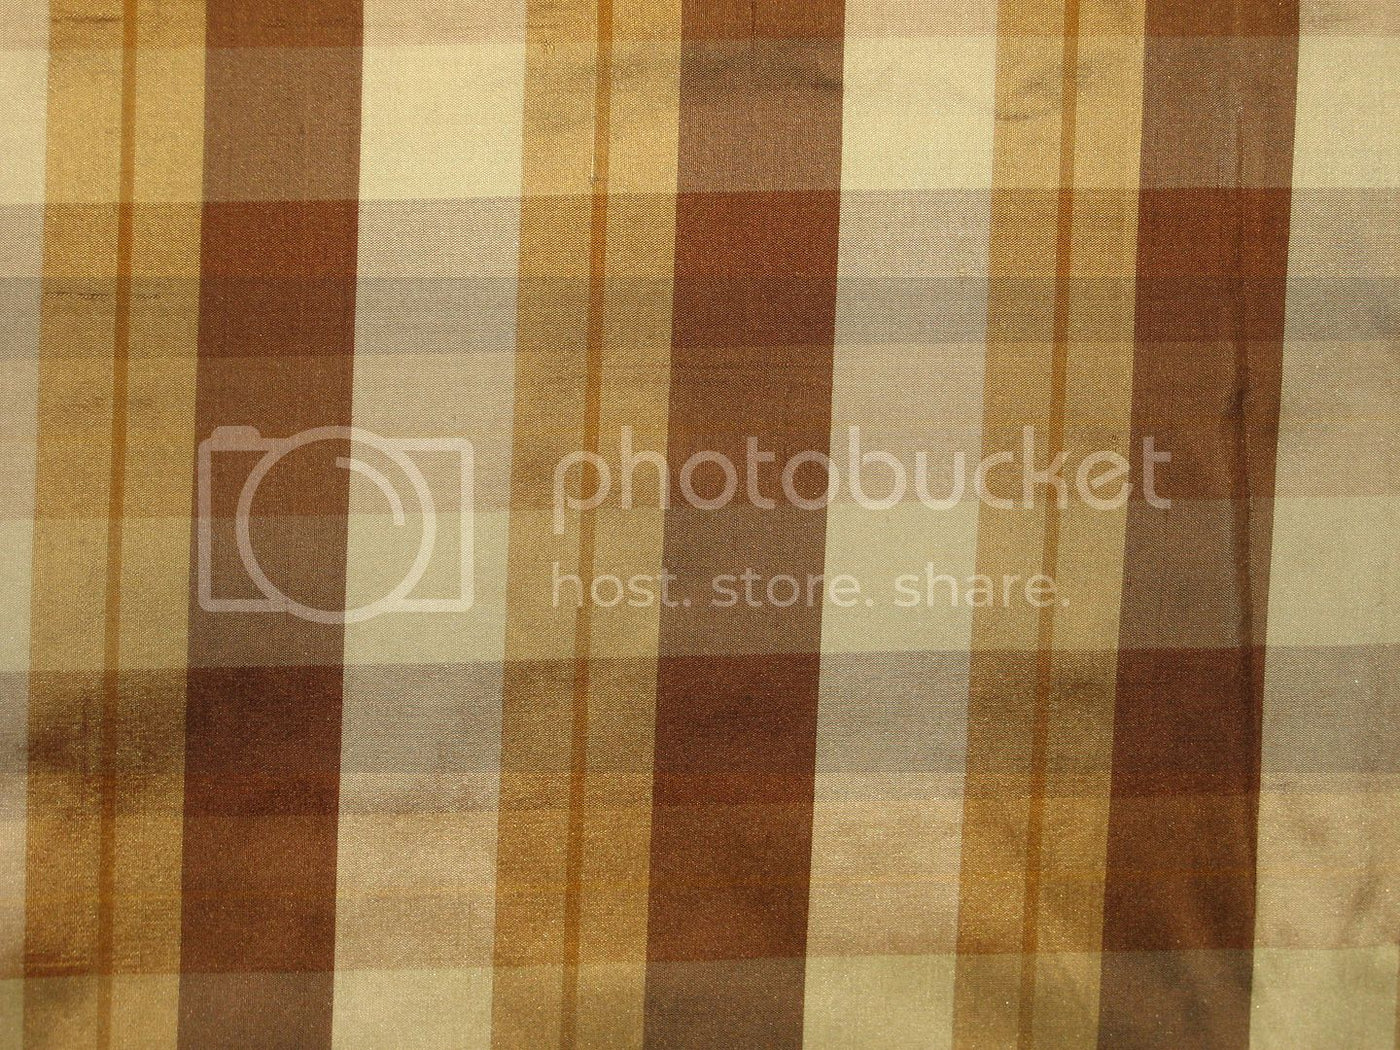 Silk Dupioni Shades of Brown & Cream color plaids Fabric 54" wide